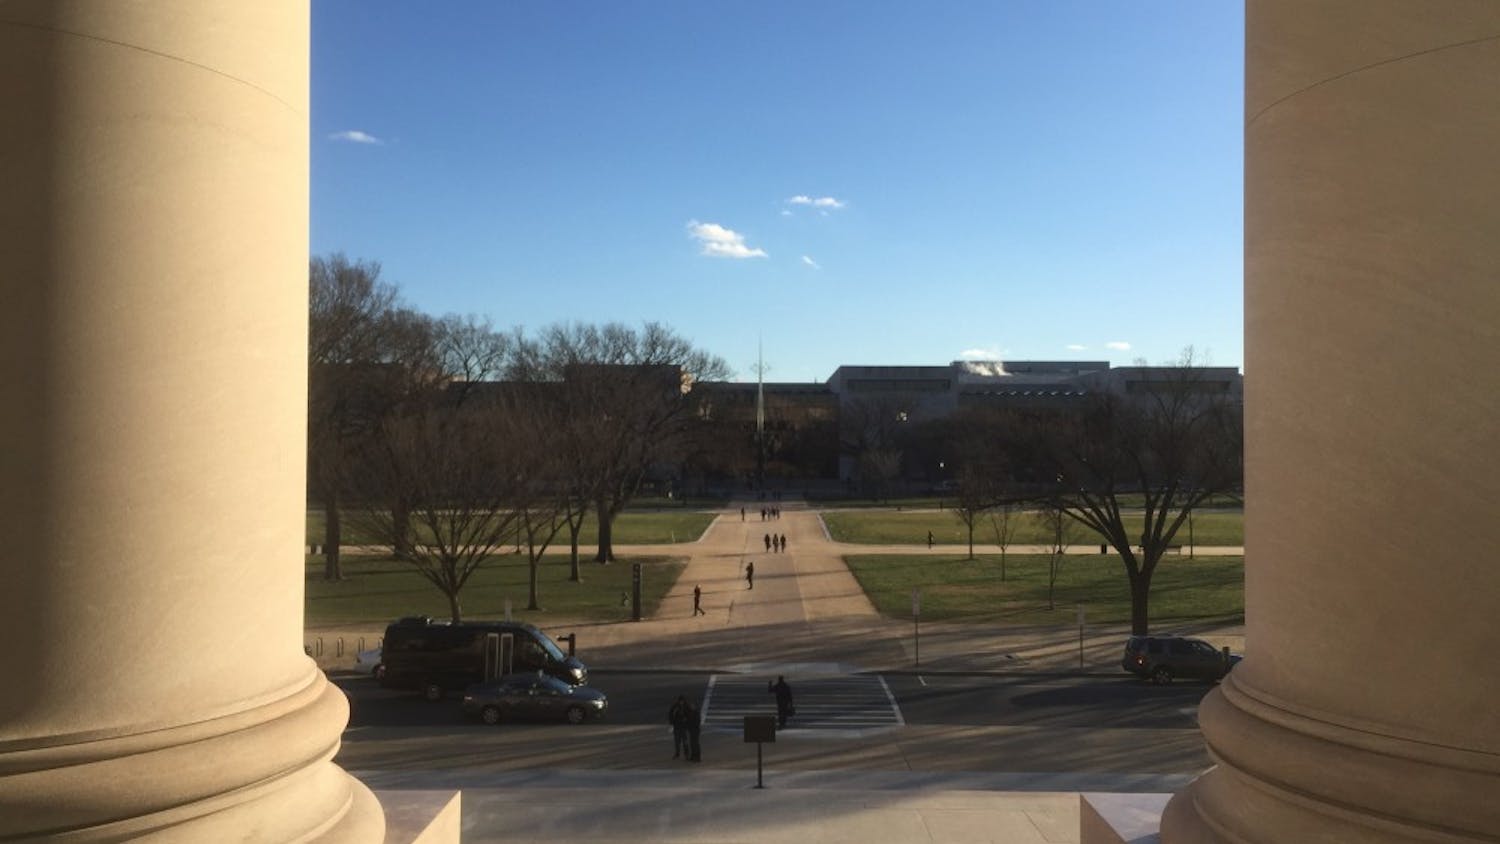 View of the National Air and Space Museum from the steps of the National Gallery of Art.